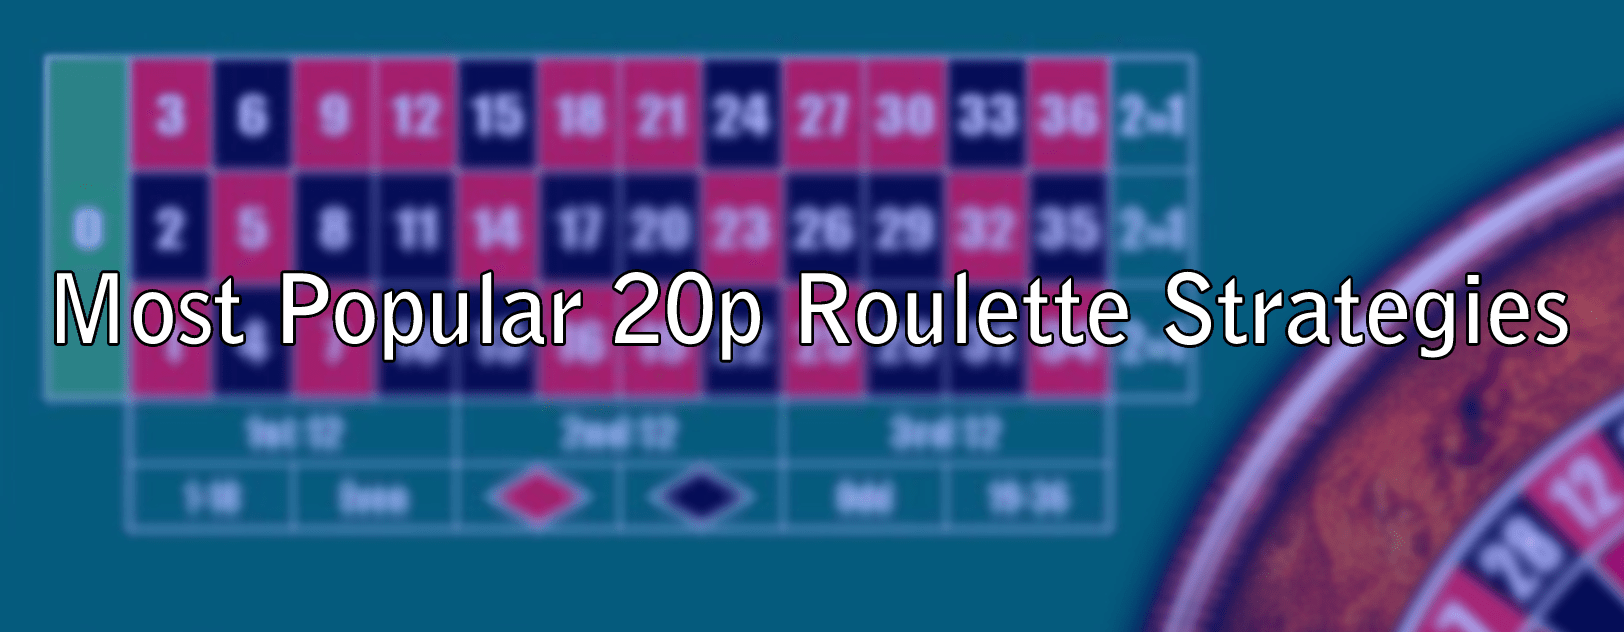 Most Popular 20p Roulette Strategies